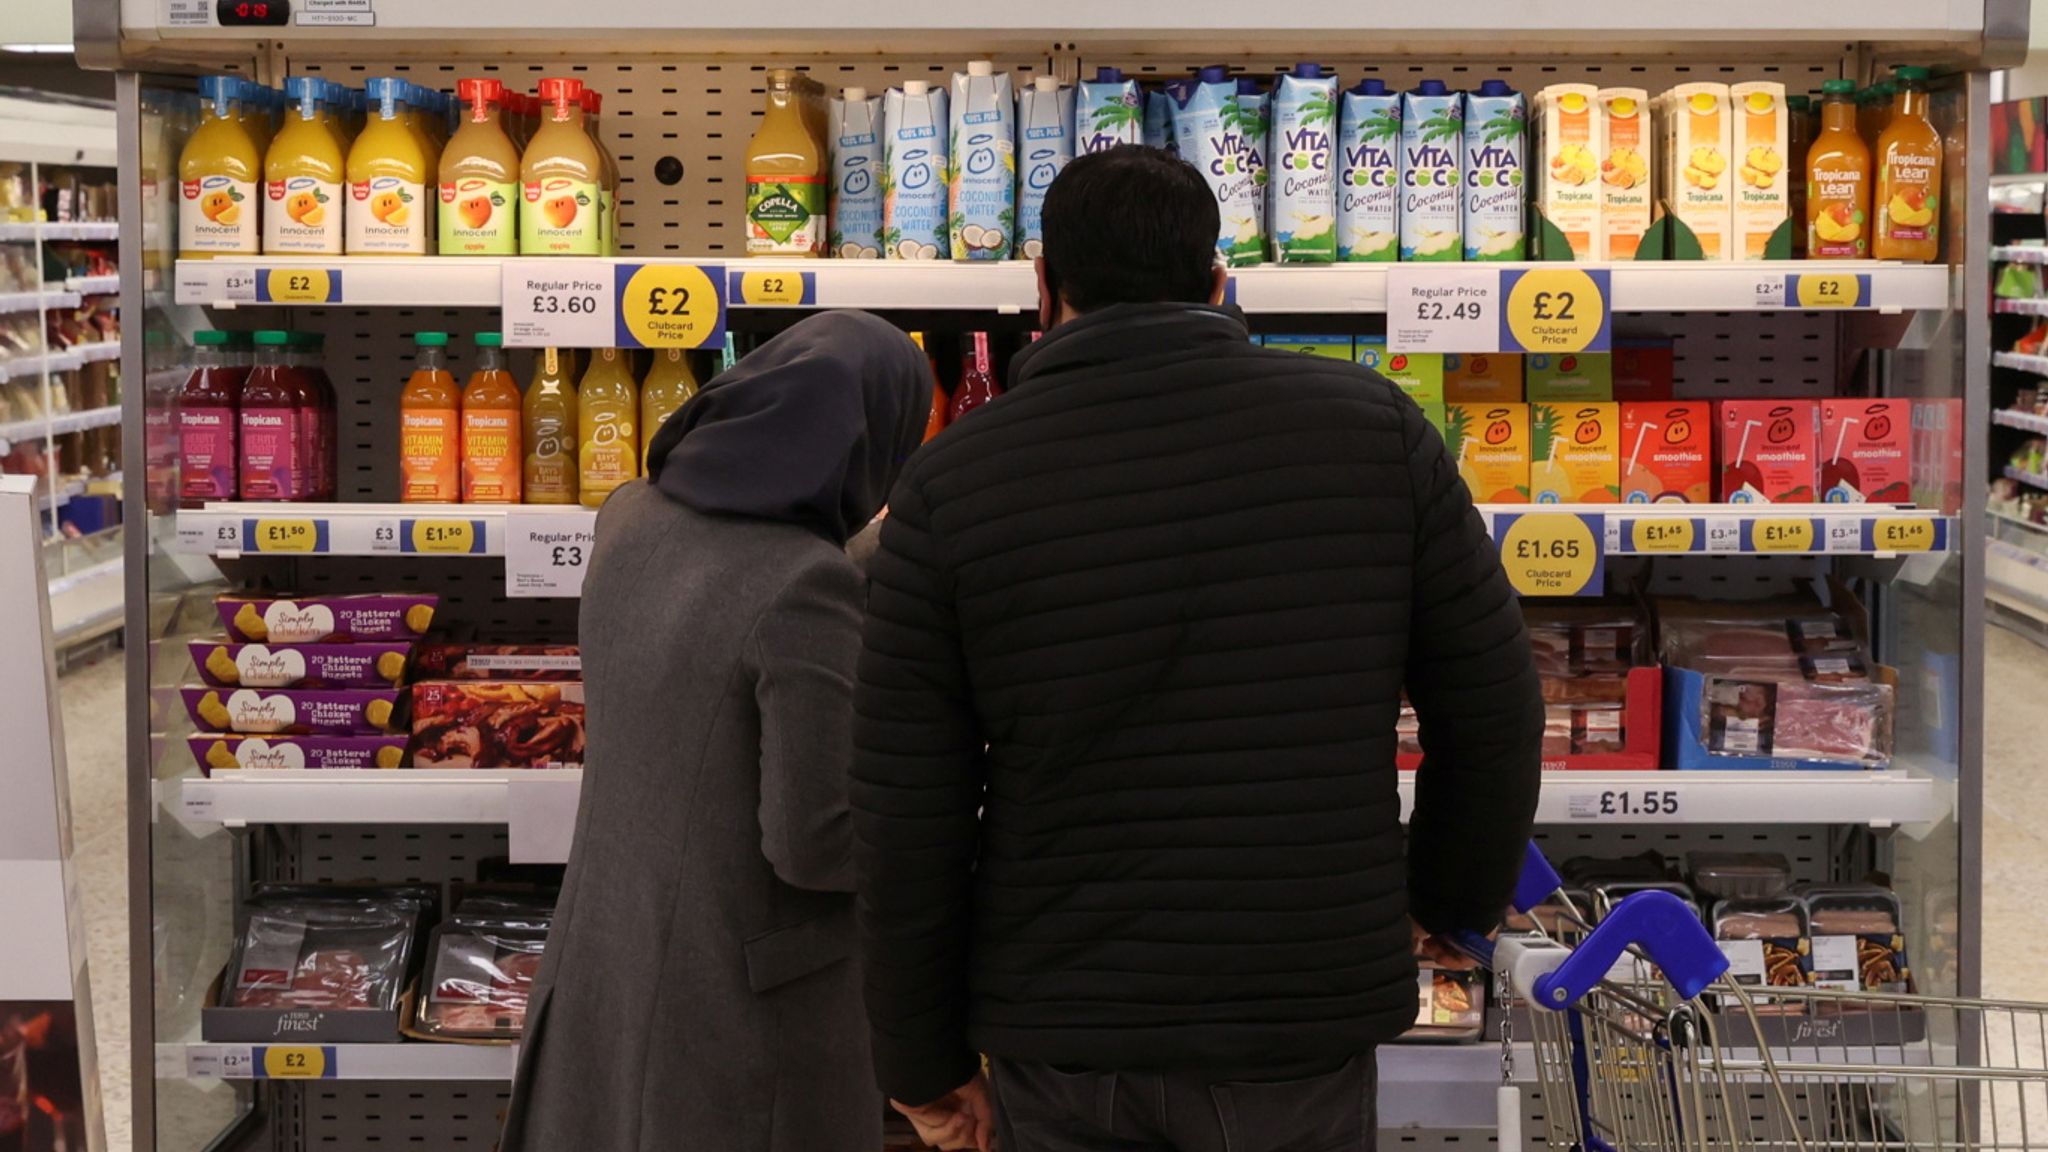 Shoppers turn to packed lunches to keep budgets in line - as grocery price inflation 'remains high'